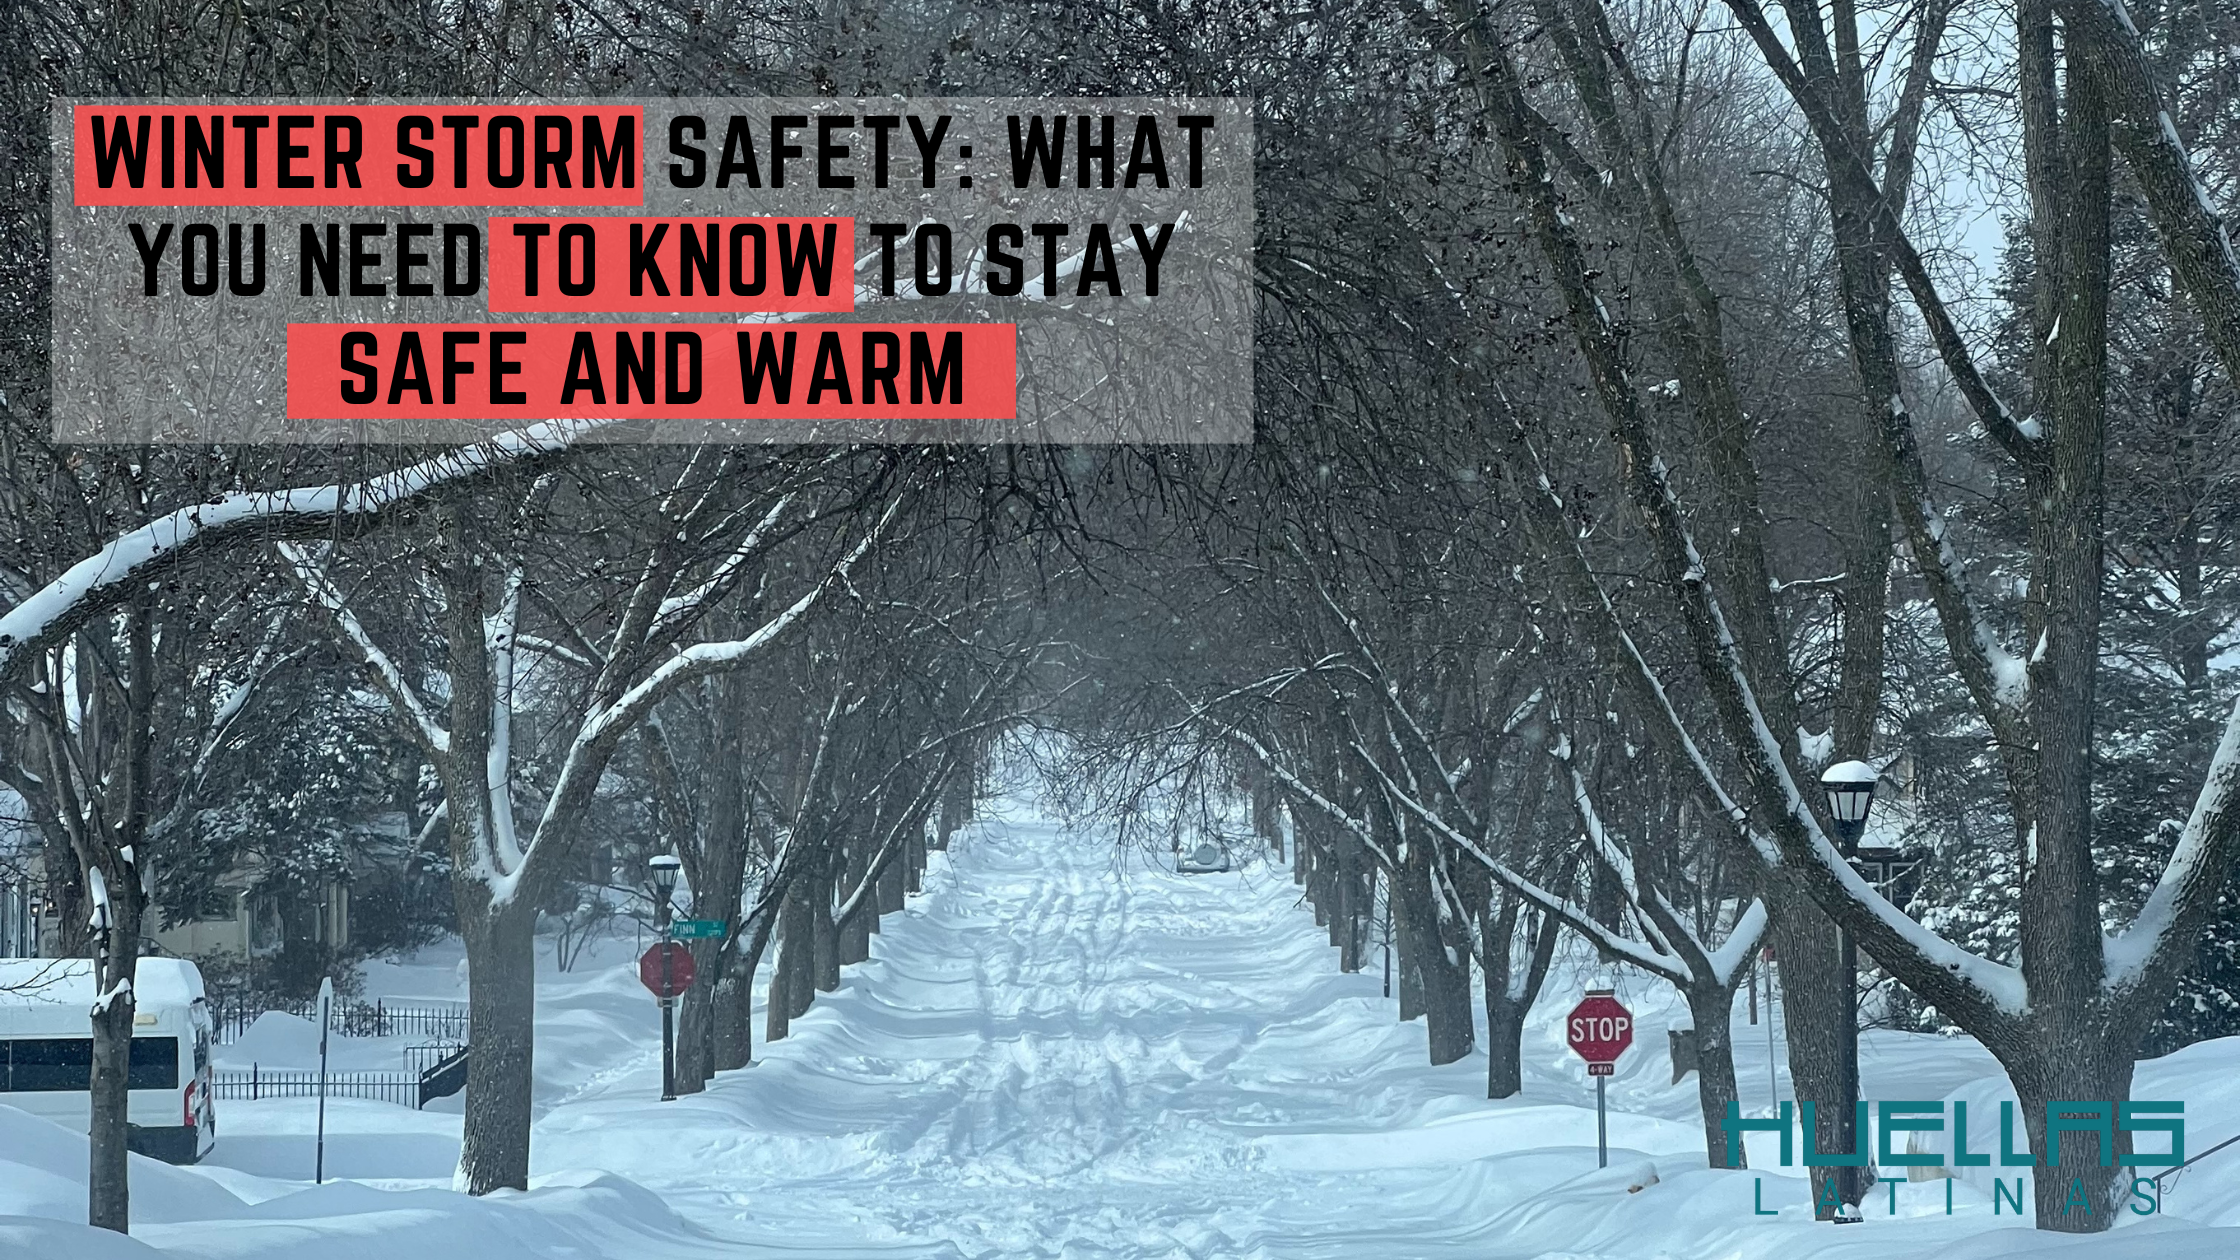 15 snowstorm essentials for bad weather: From indoor heaters to